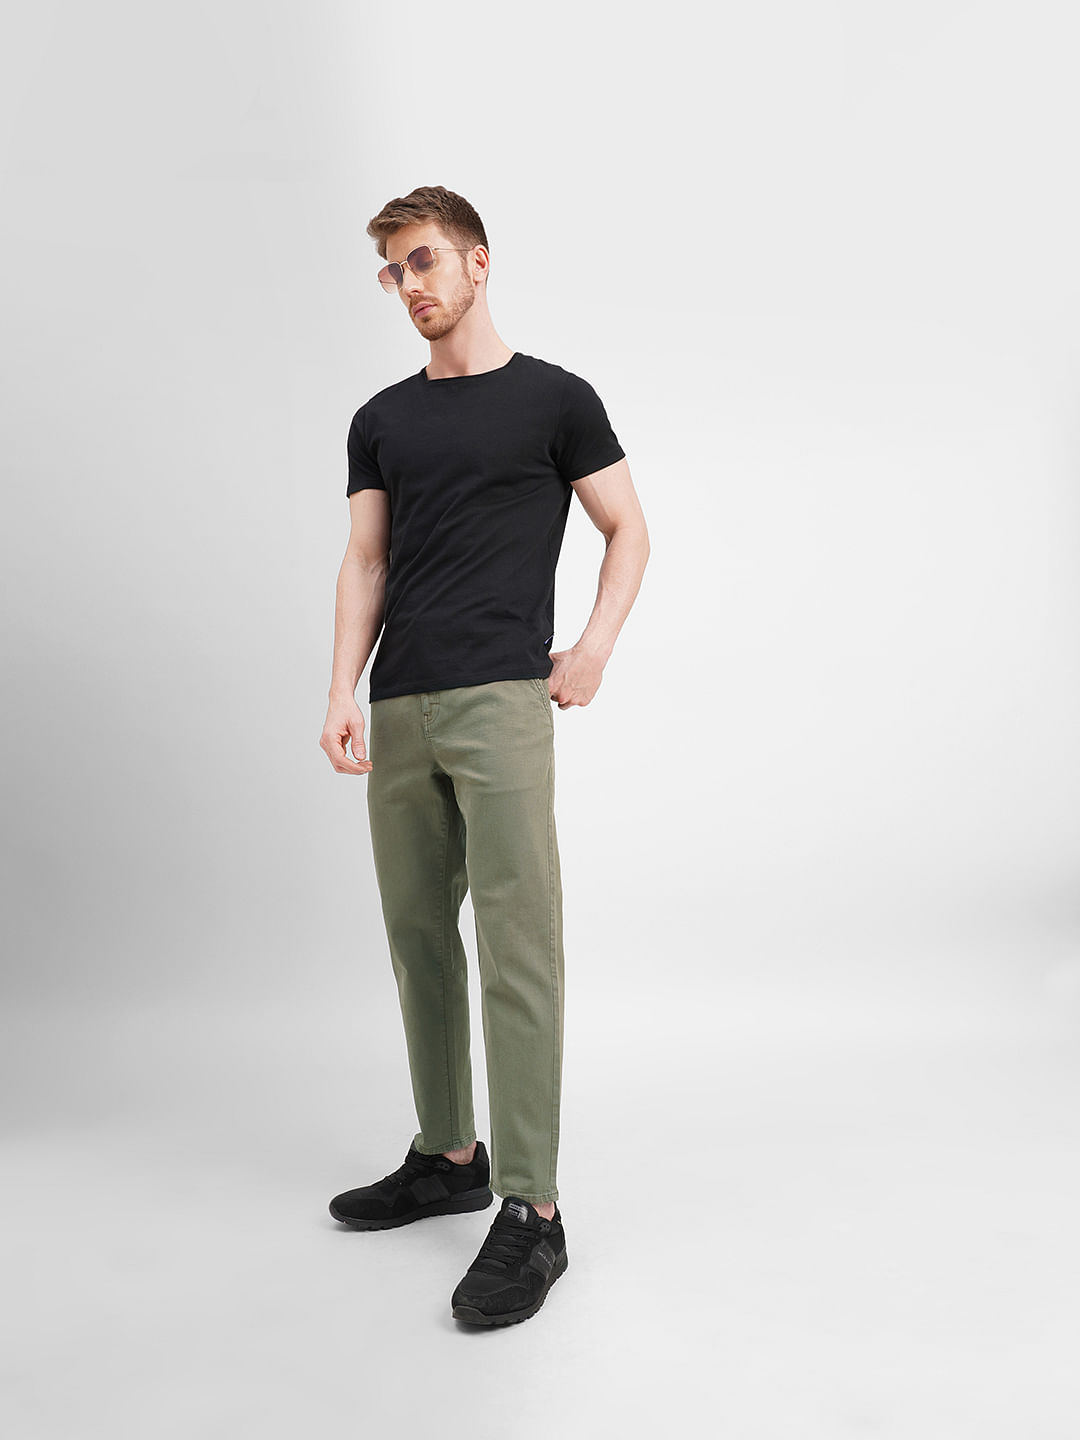 Buy Olive Green Trousers & Pants for Women by Outryt Online | Ajio.com